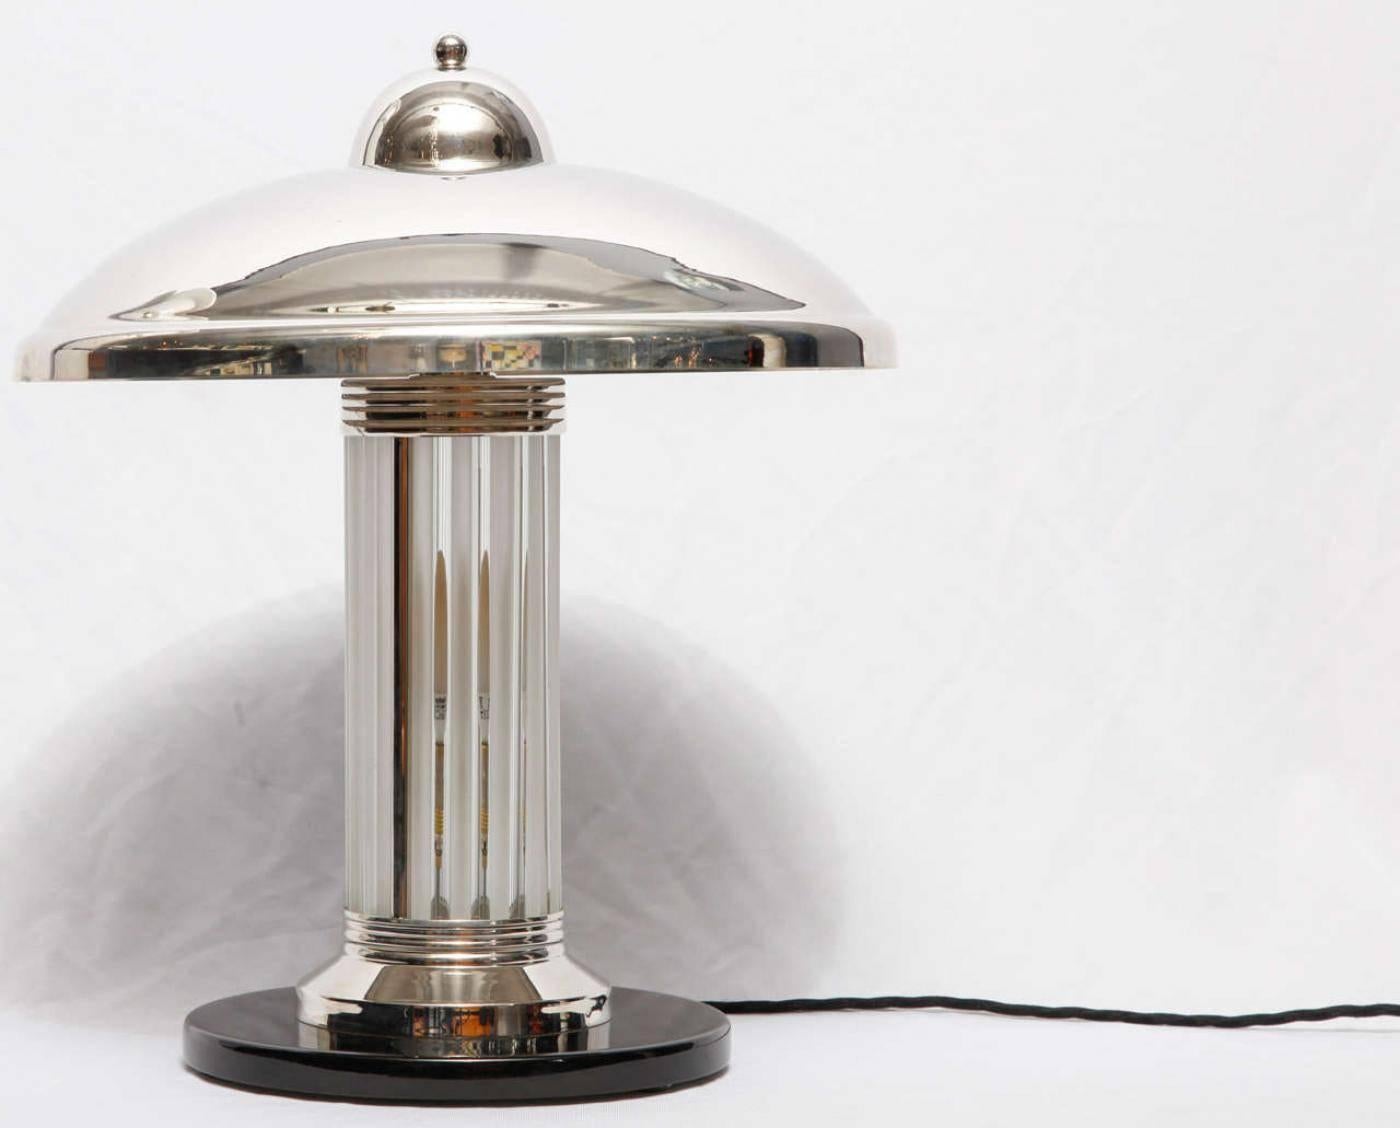 Pair of Art Deco table lamps designed by Petitot. Nickel-plated metal and glass.